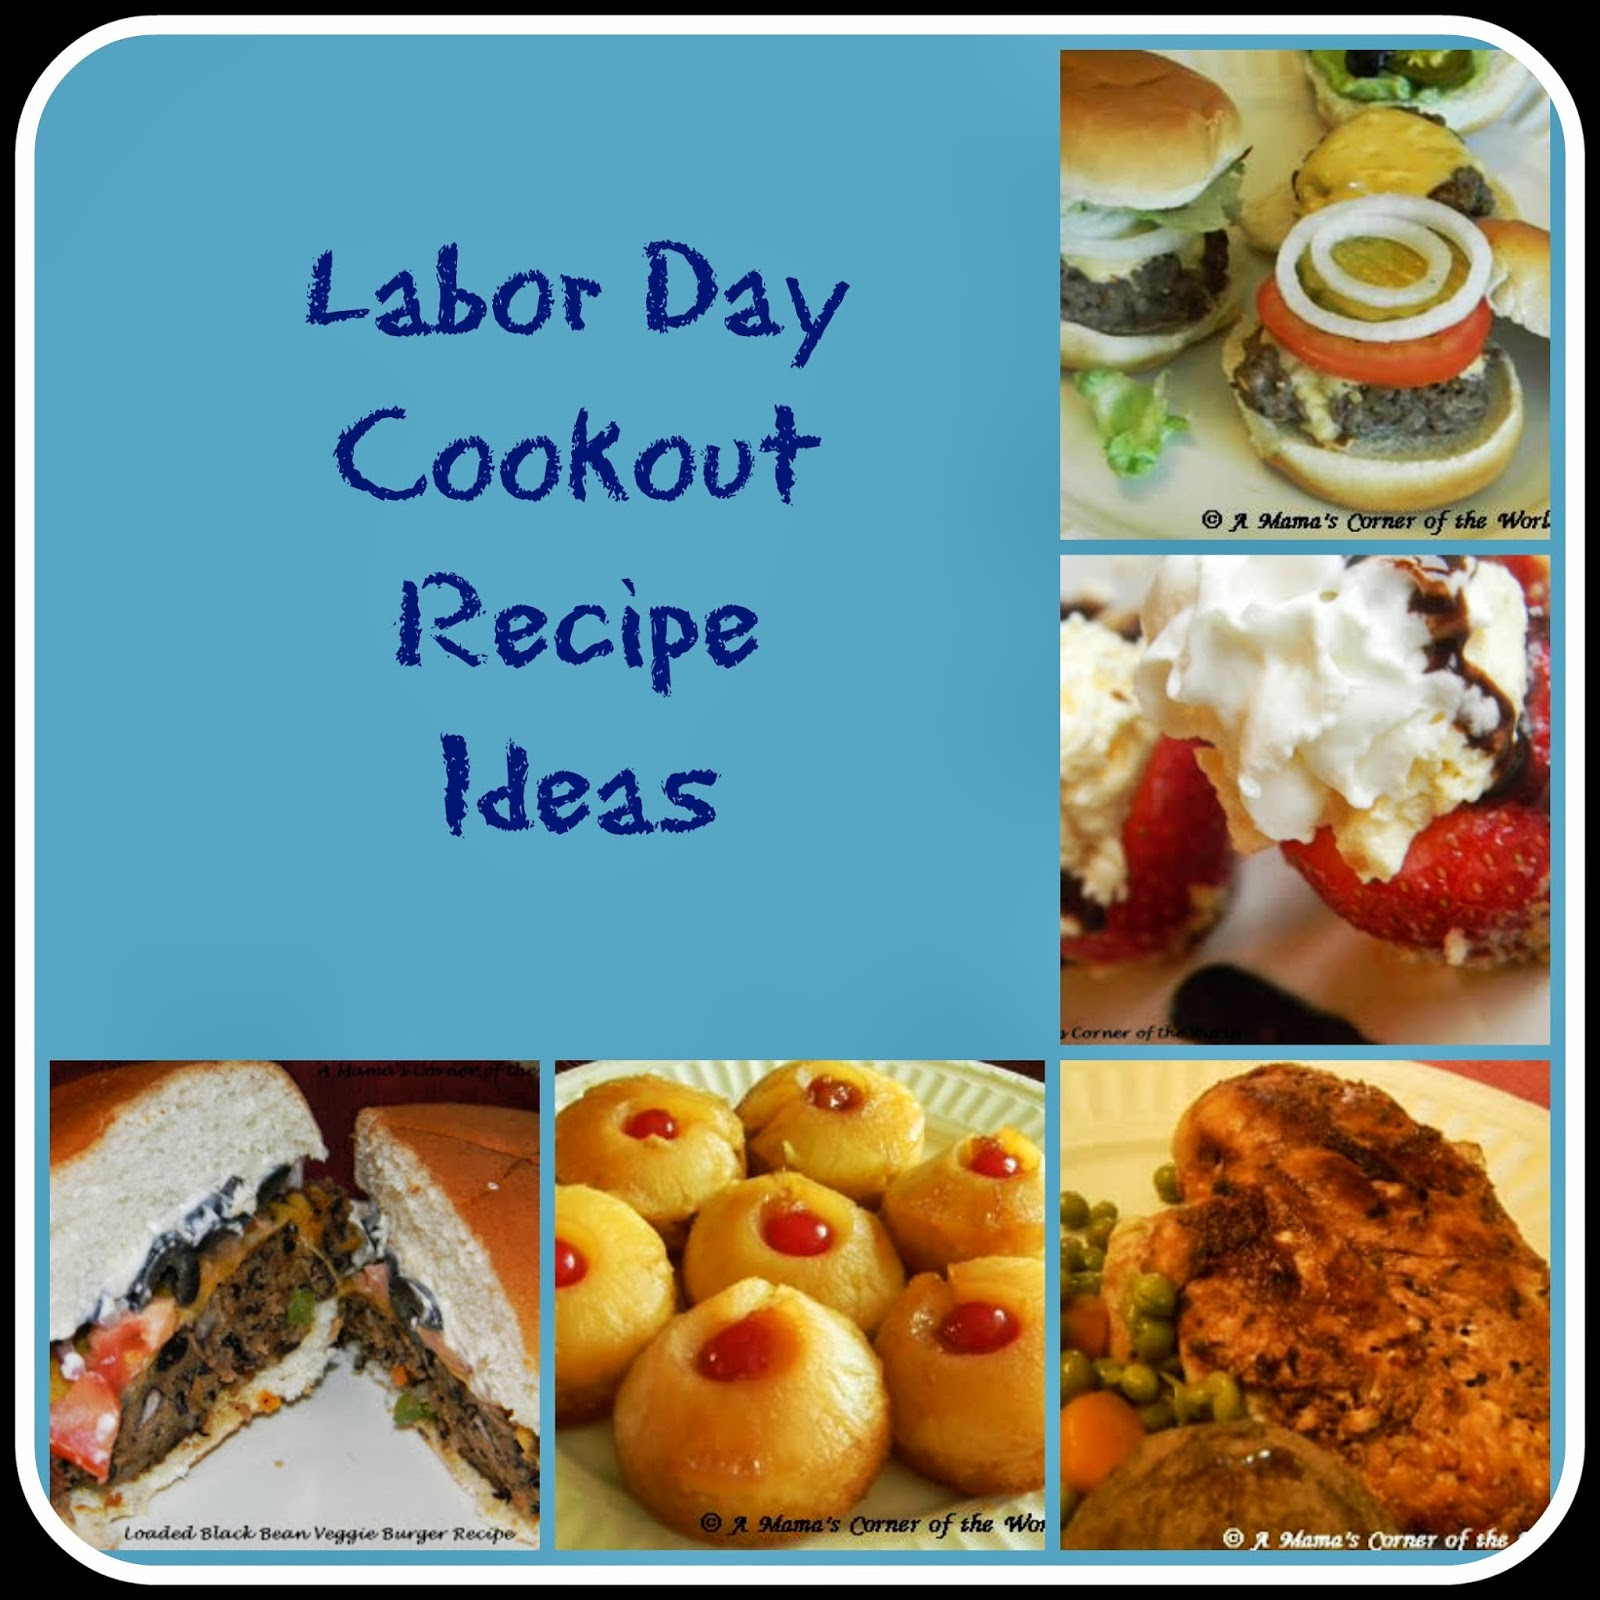 Labor Day Food Ideas
 Labor Day Cookout Recipe Ideas A Mama s Corner of the World